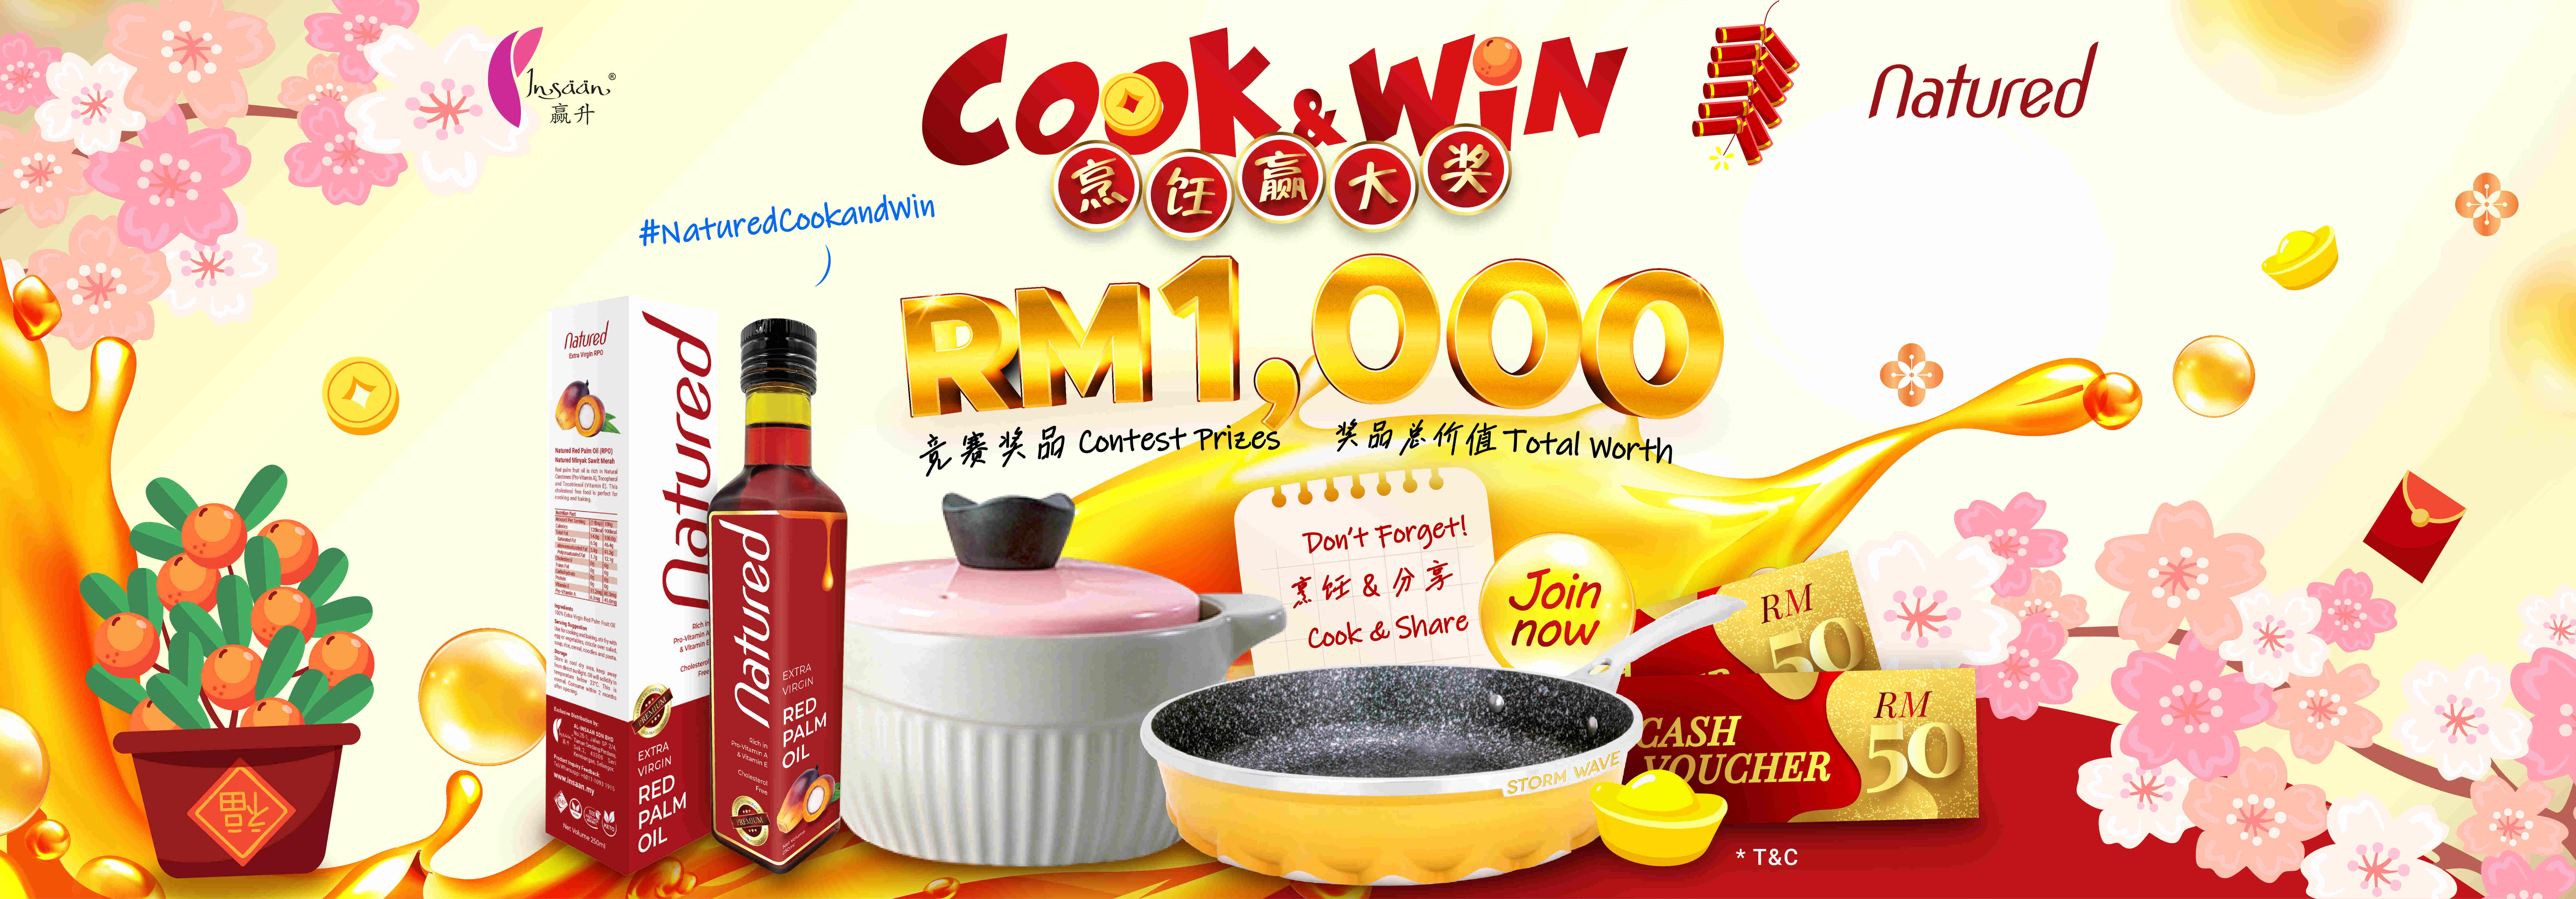 Cook and WIn